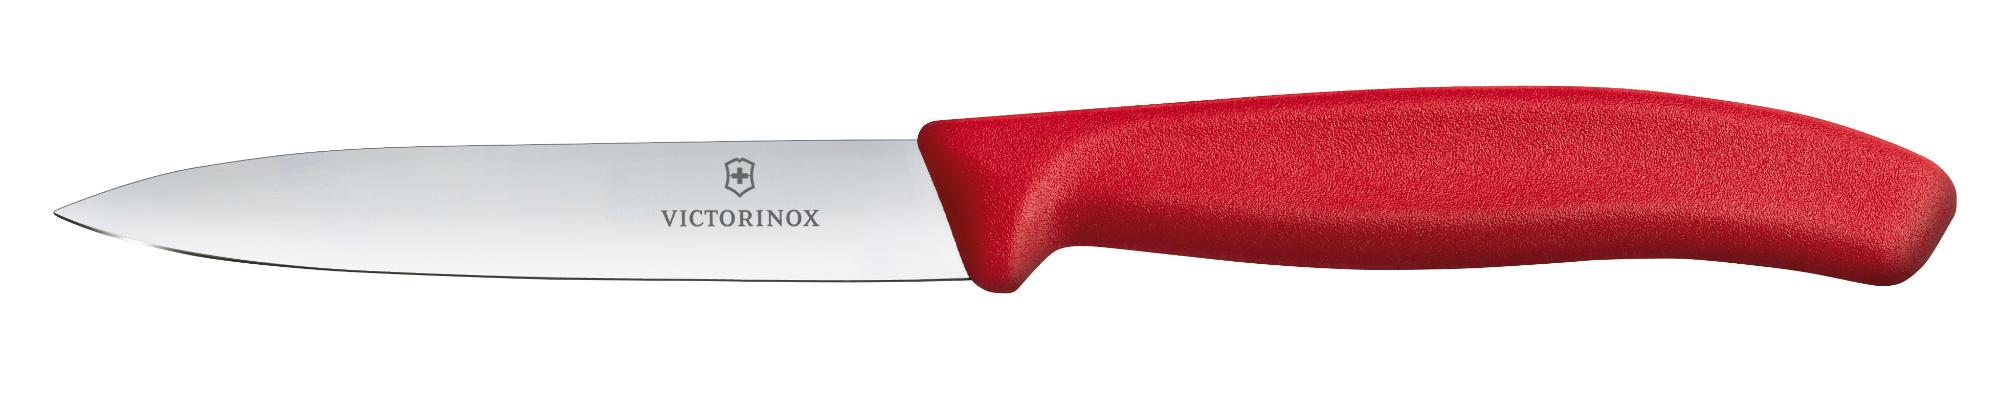 Swiss Classic vegetable knife, smooth, 10 cm - red